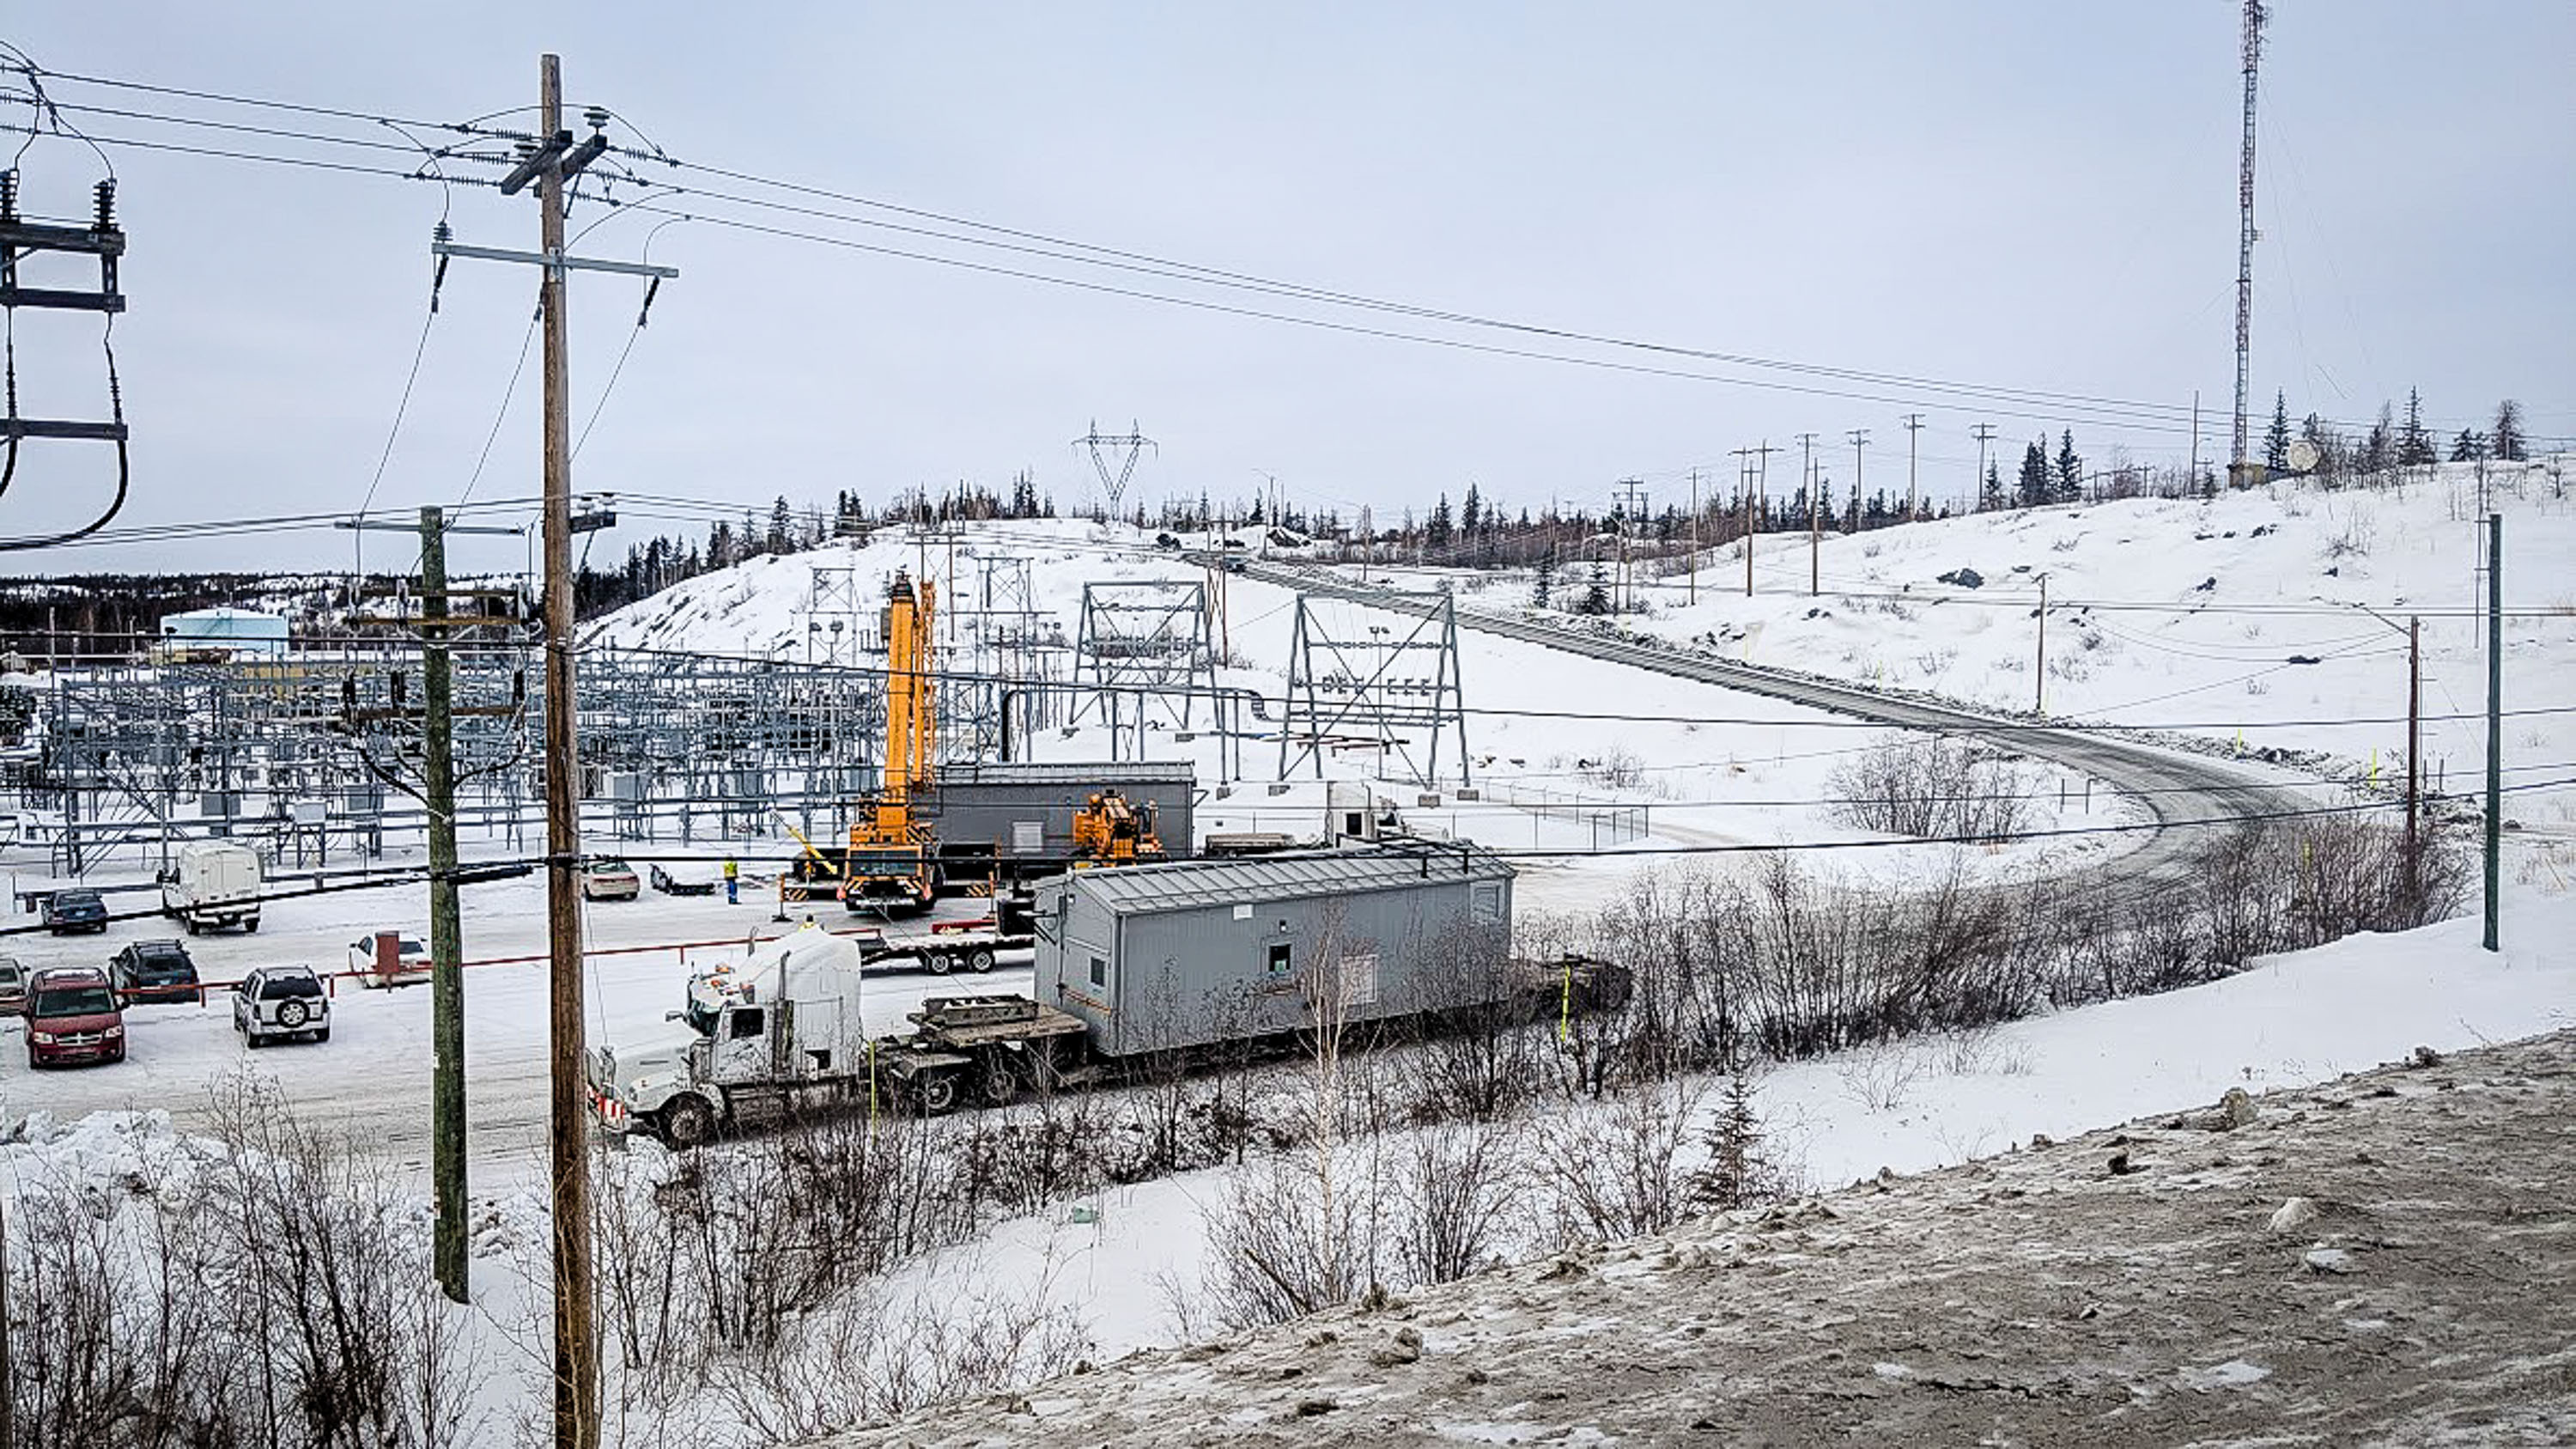 Modular diesel generators, in grey, can be seen being lifted into place at the Jackfish power plant on March 8, 2019